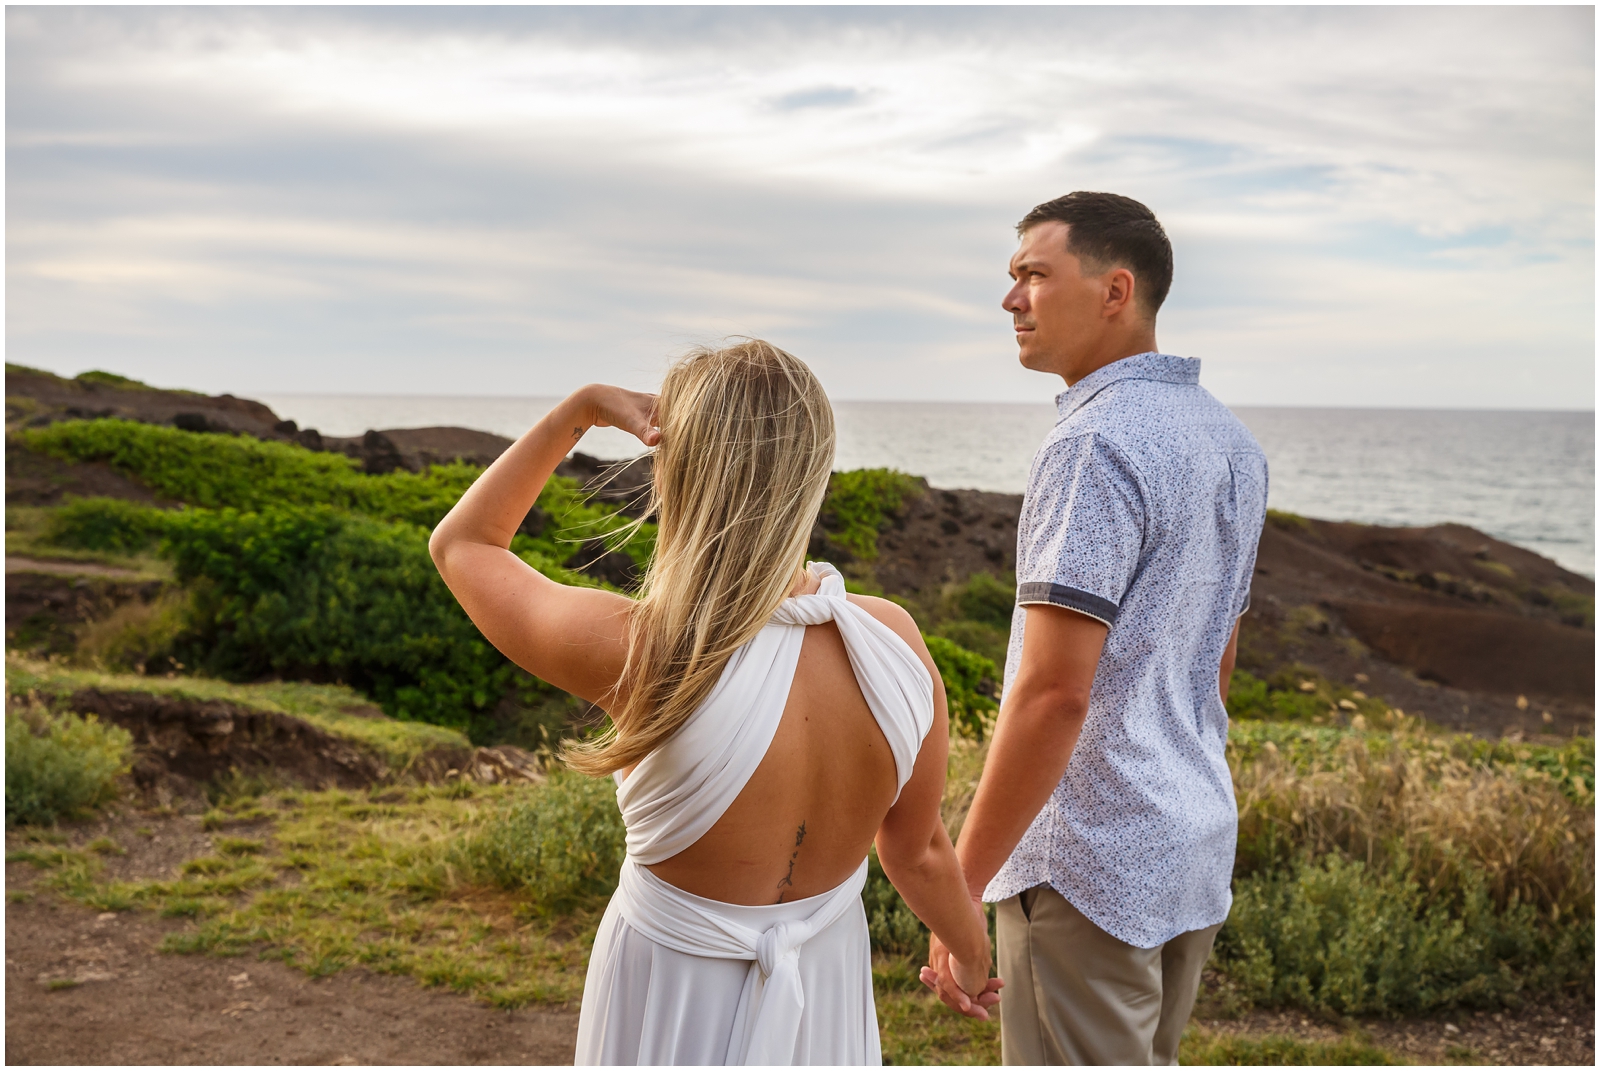 Views for days during this couple's Oahu, Hawaii elopement.